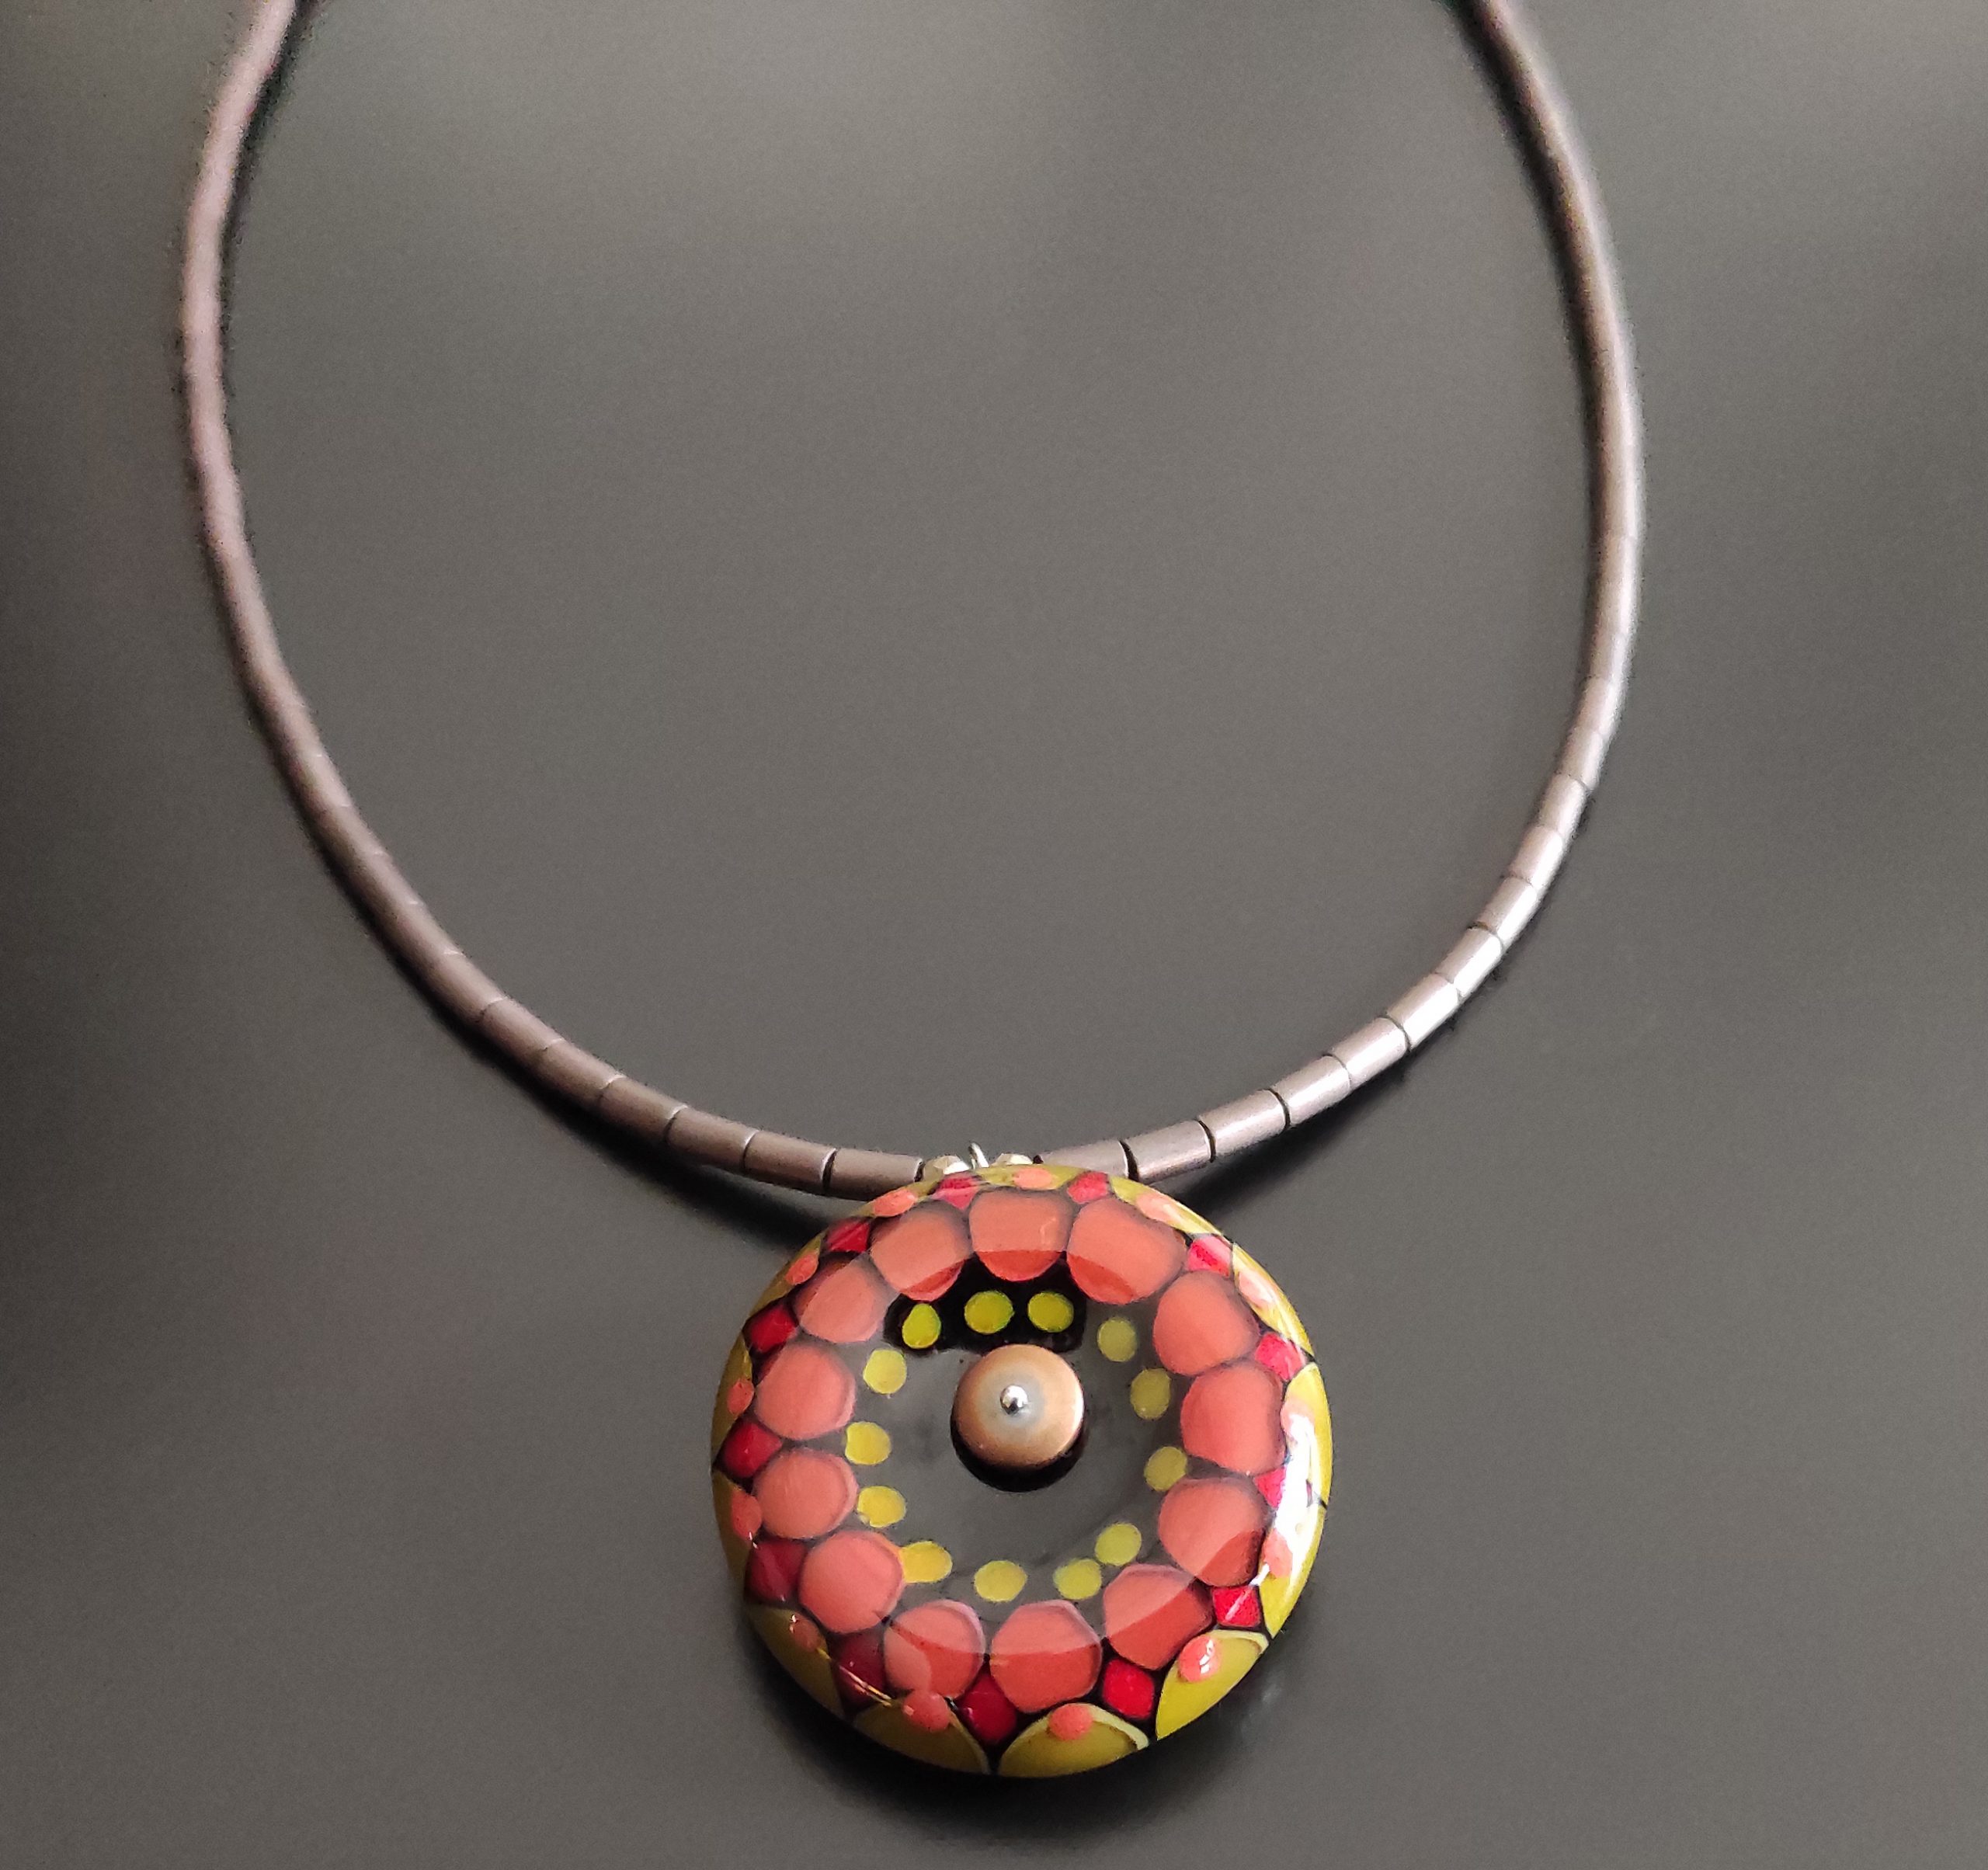 Alessia Fuga - Murano glass disc bead and stones necklace